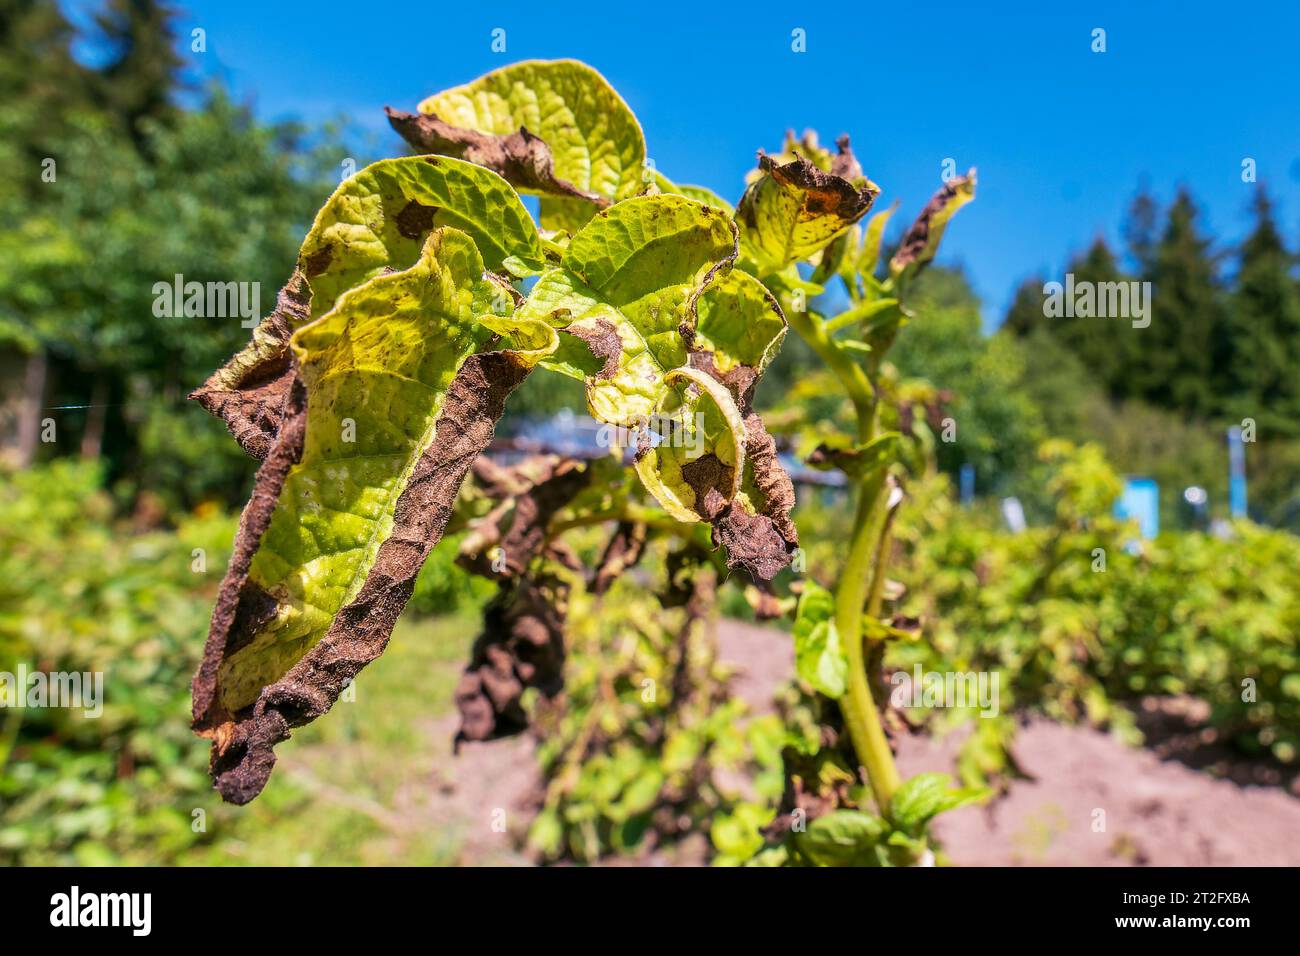 Phytophthora. Potato leaves with the disease at close range Stock Photo